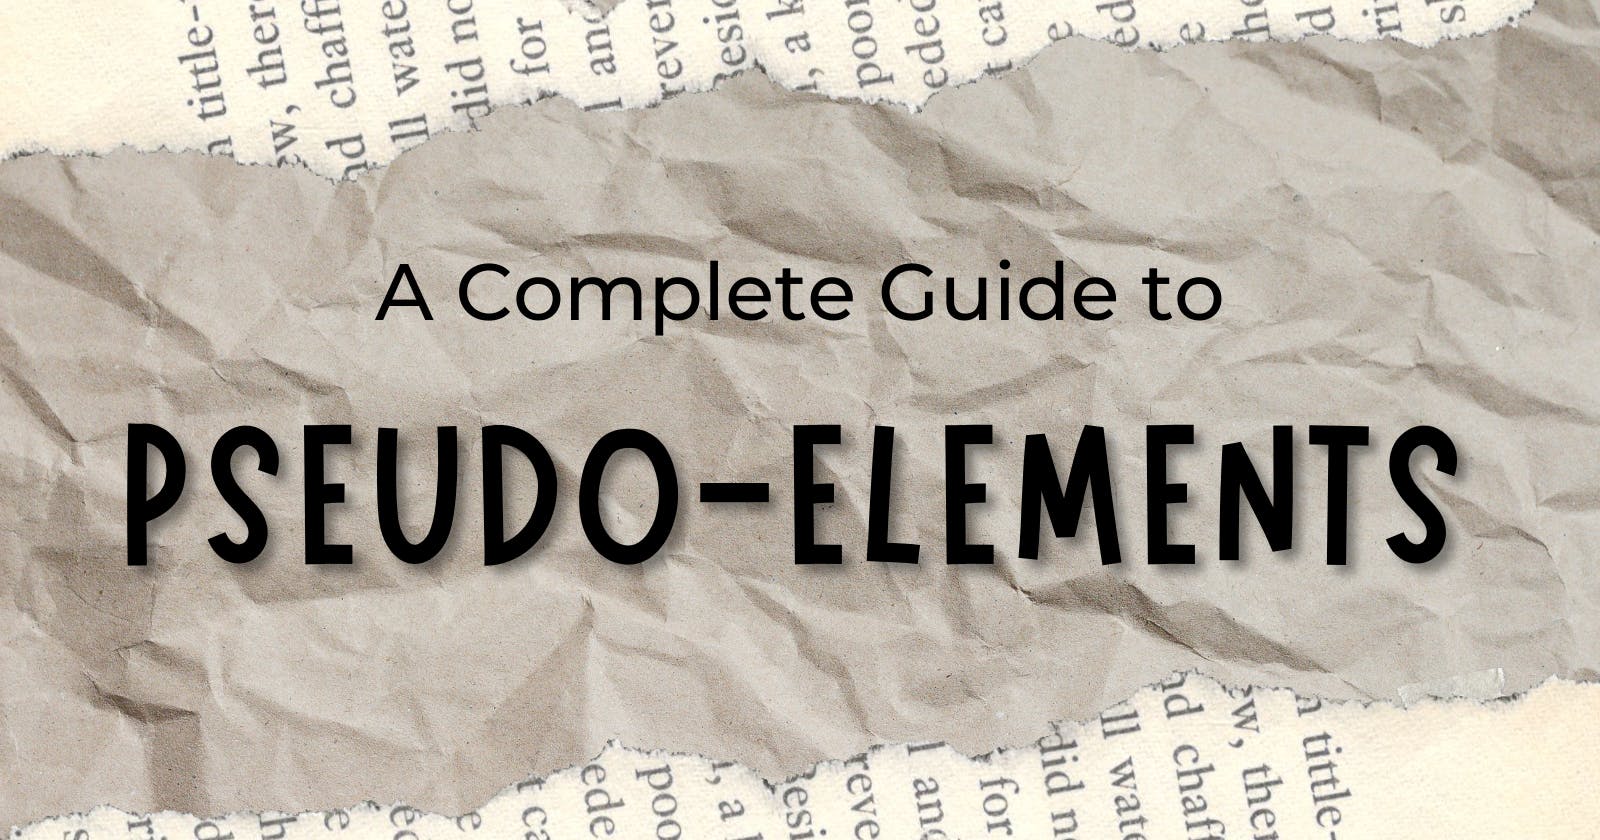 A Complete Guide to Pseudo-Elements ✨